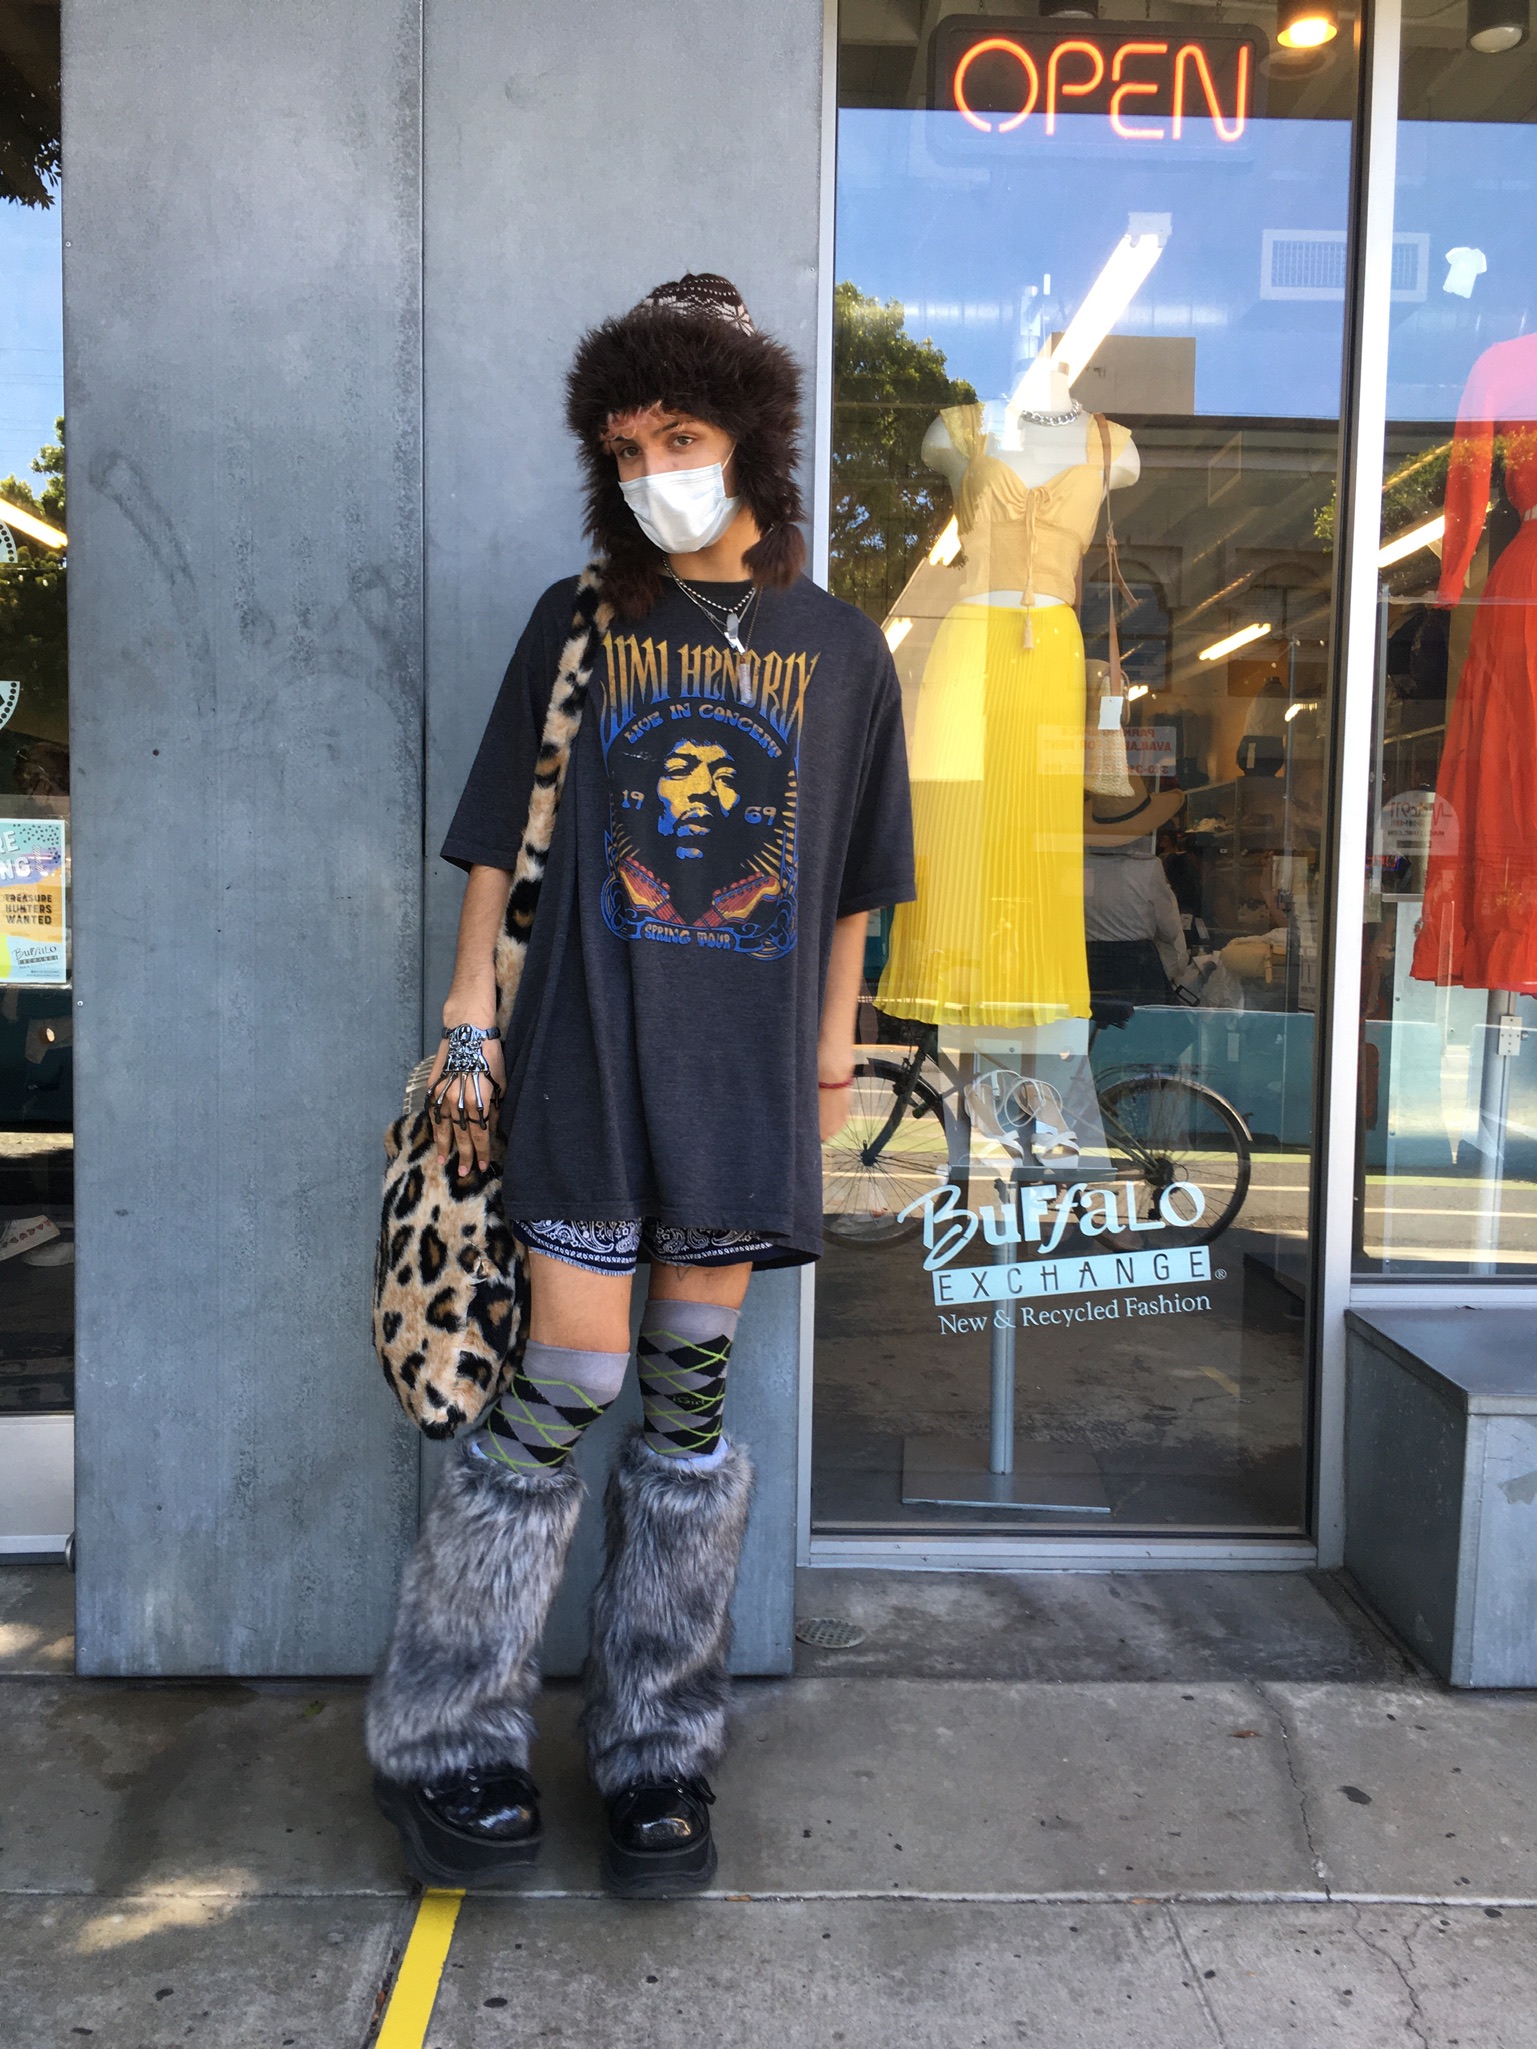 Person stands in front of 'open' sign at Buffalo Exchange Ventura wearing Jimi Hendrix t-shirt, bandana shorts, leopard print shoulder bagargyle knee socks and fuzzy leg warmers over black platform shoes.